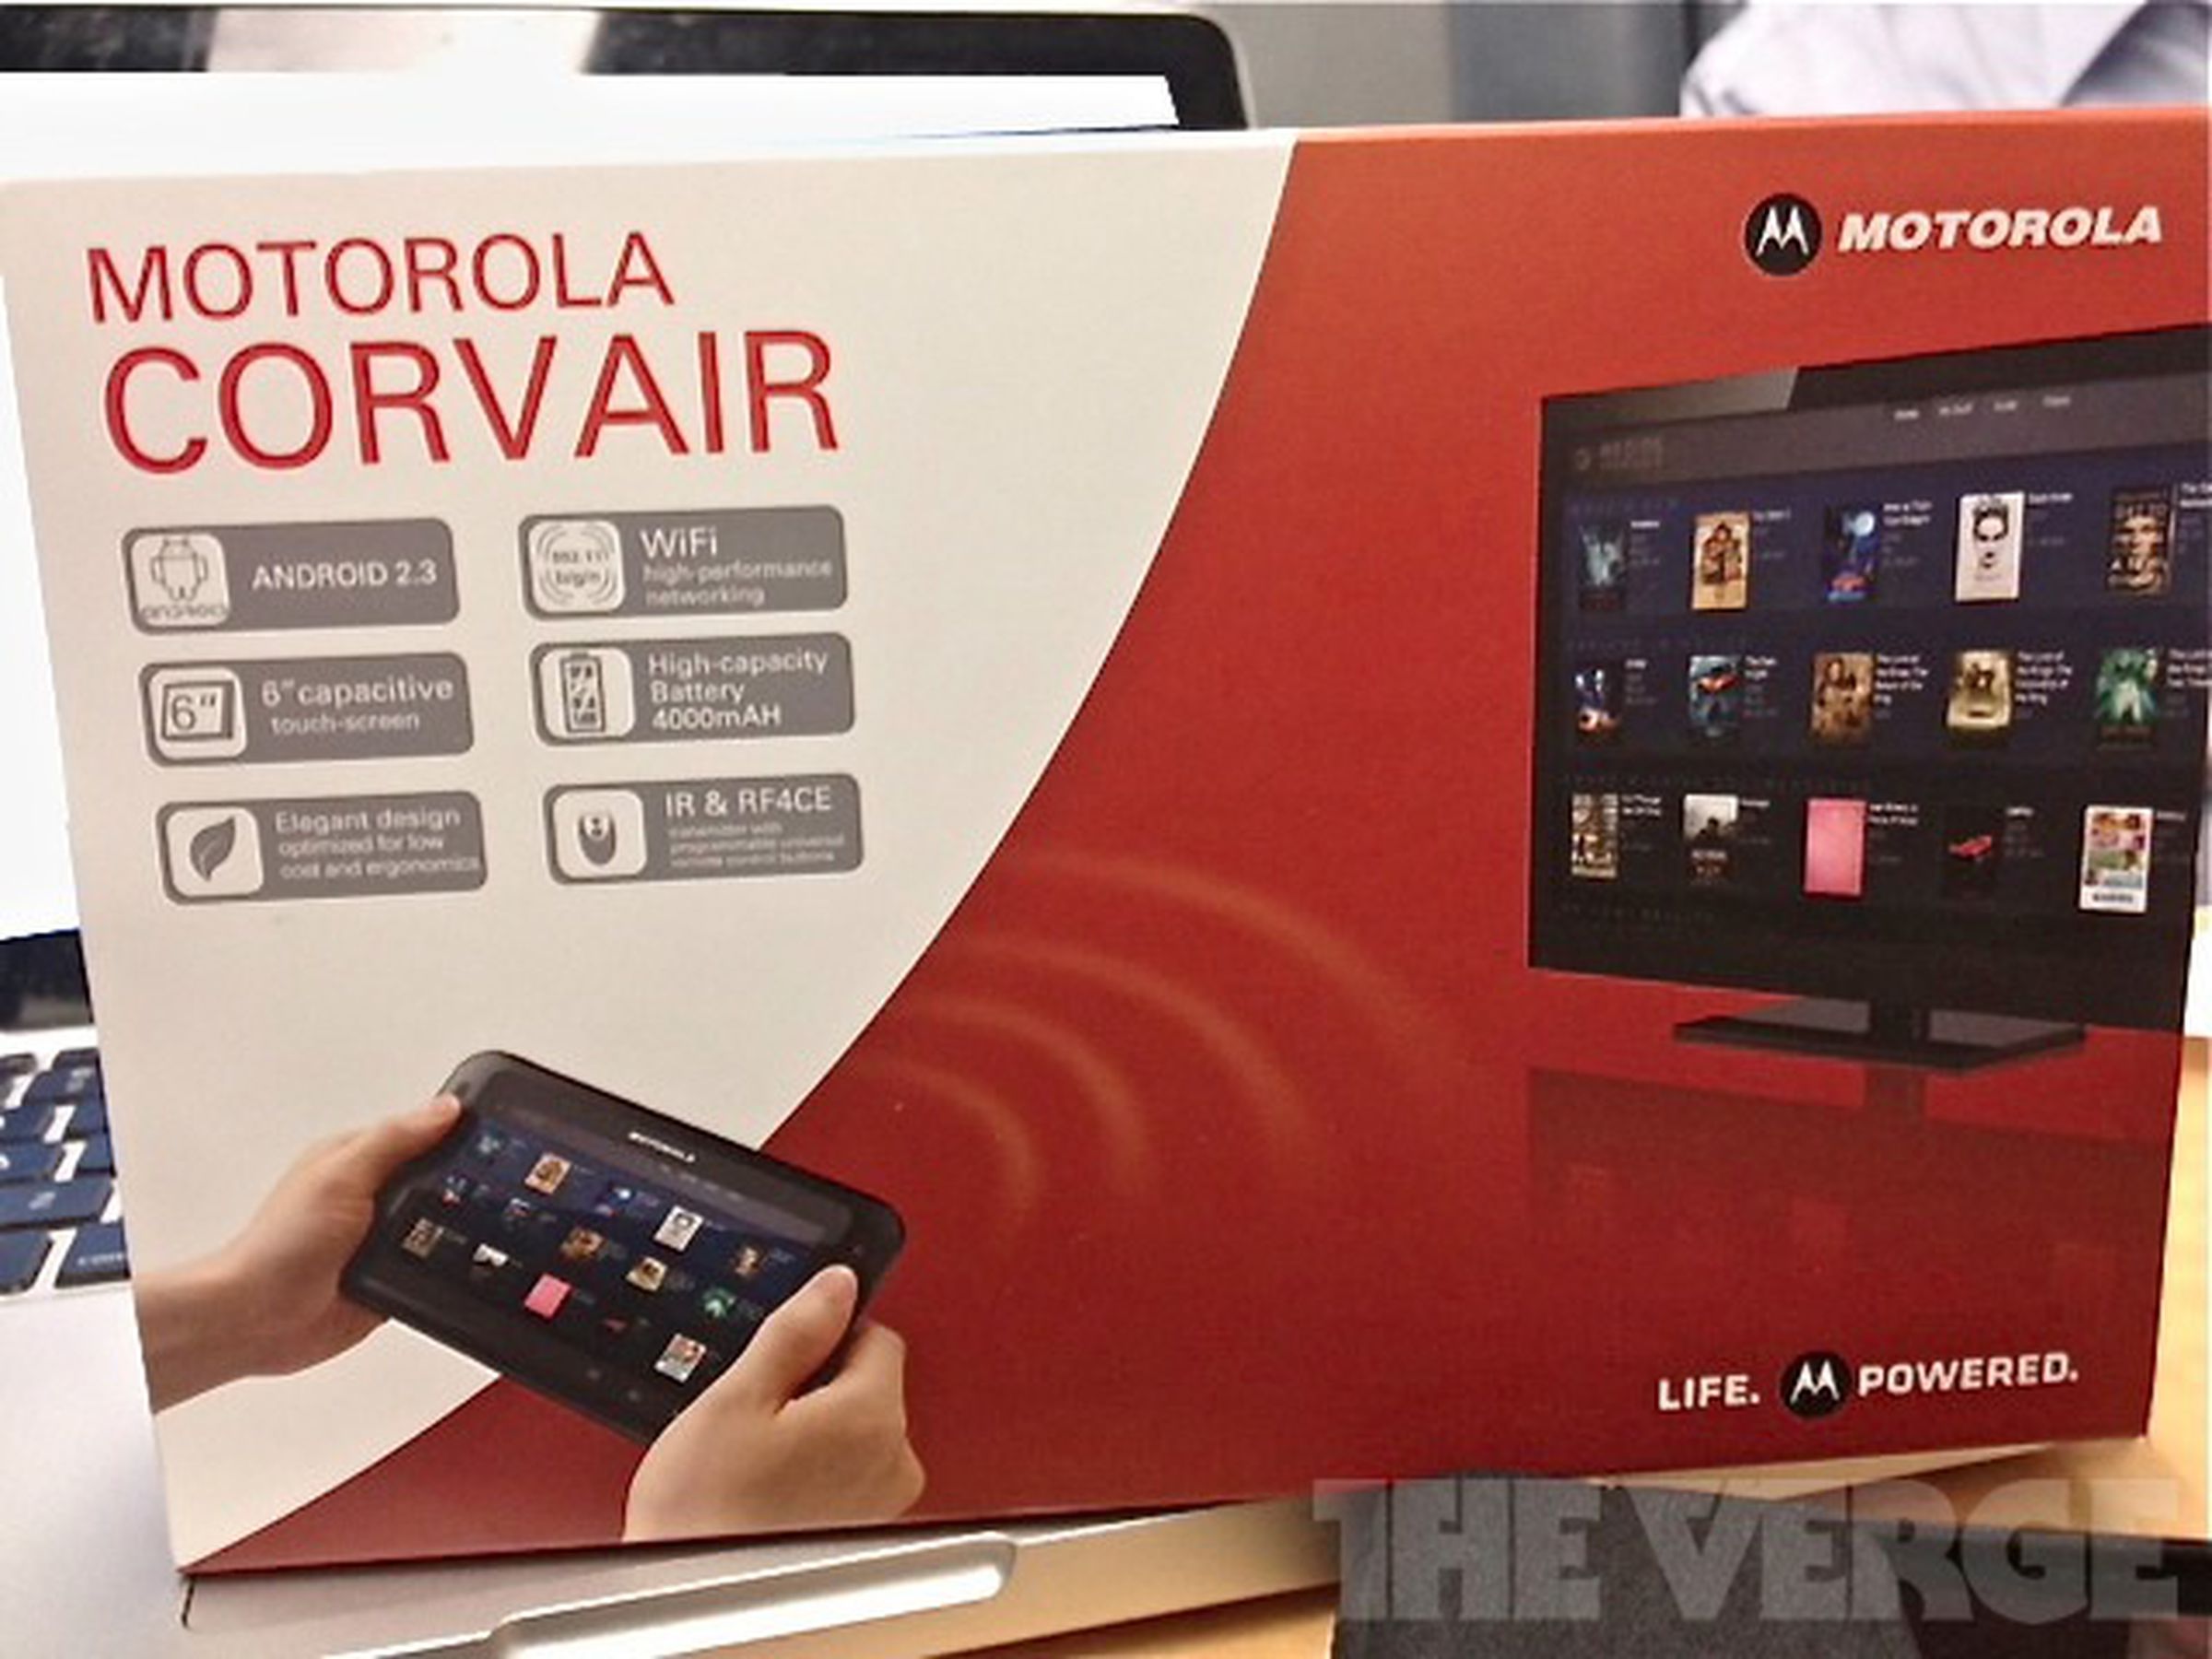 Motorola Corvair Android tablet controller